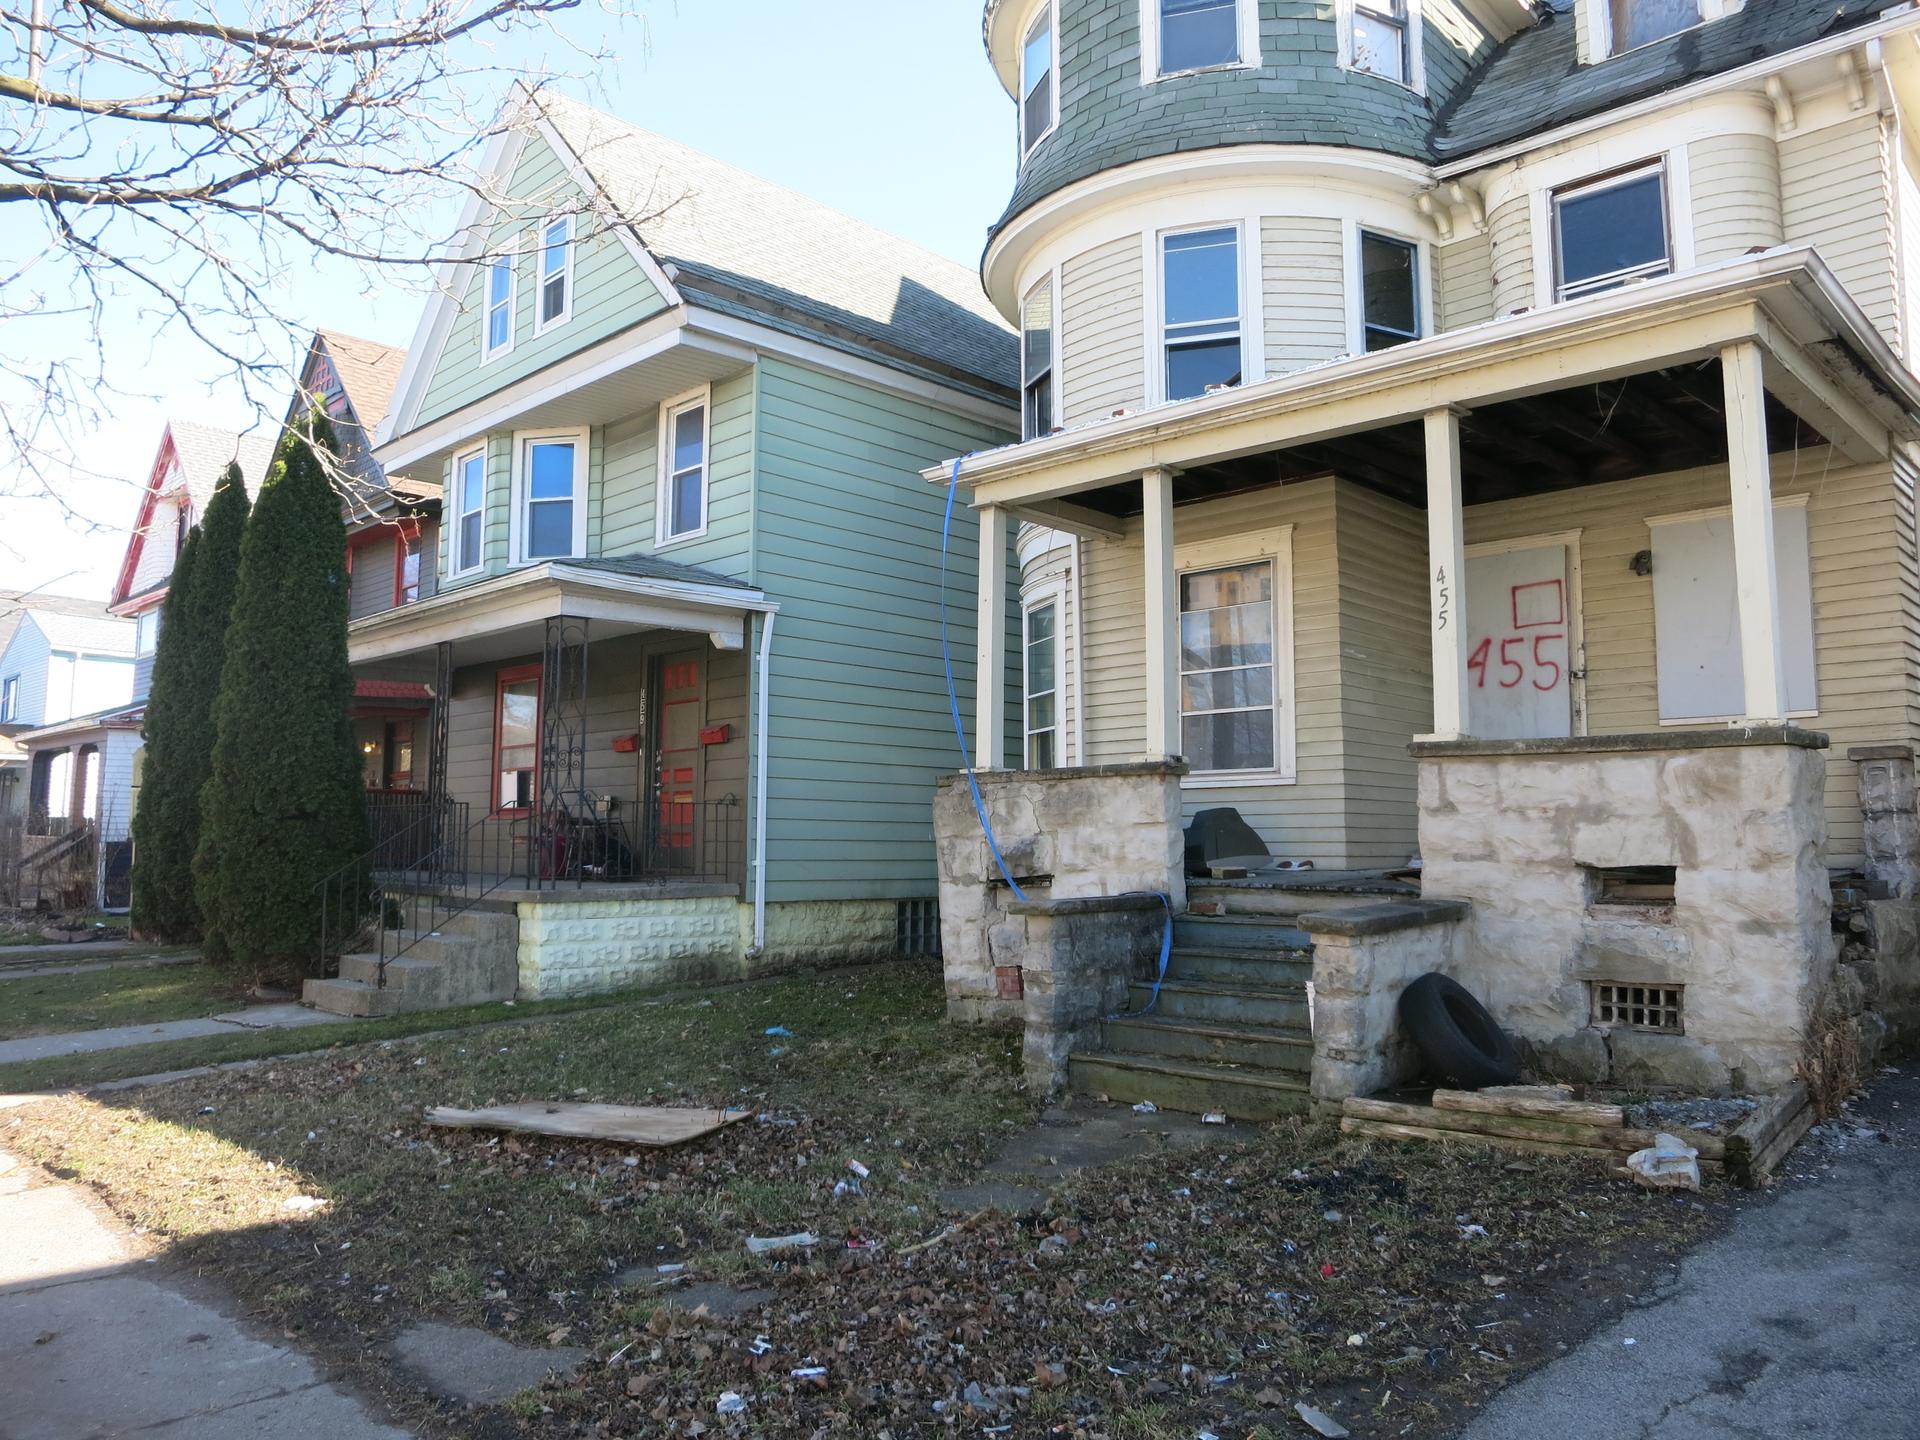 Many of the homes in Buffalo’s lower east side are badly in need of repair and upgrades.